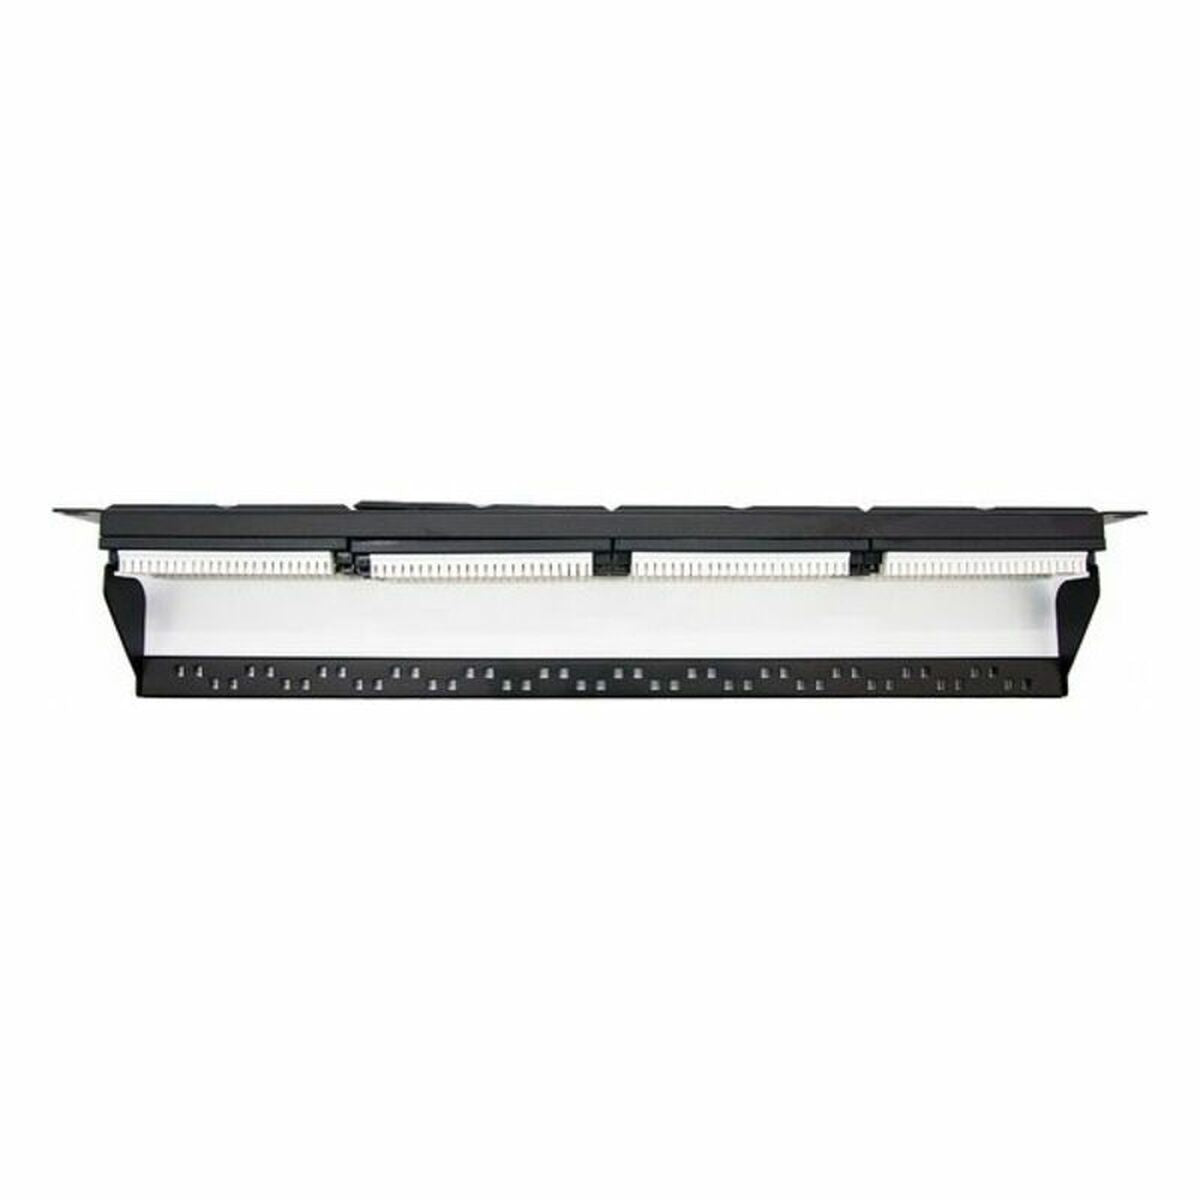 24-port UTP Category 6 Patch Panel NANOCABLE 10.21.3124 19" RJ45 Black, NANOCABLE, Computing, Cabling and connectivity, 24-port-utp-category-6-patch-panel-nanocable-10-21-3124-19-rj45-black, Brand_NANOCABLE, category-reference-2609, category-reference-2803, category-reference-2828, category-reference-t-19685, category-reference-t-21716, category-reference-t-26144, category-reference-t-7066, Condition_NEW, ferretería, networks/wiring, Price_20 - 50, RiotNook